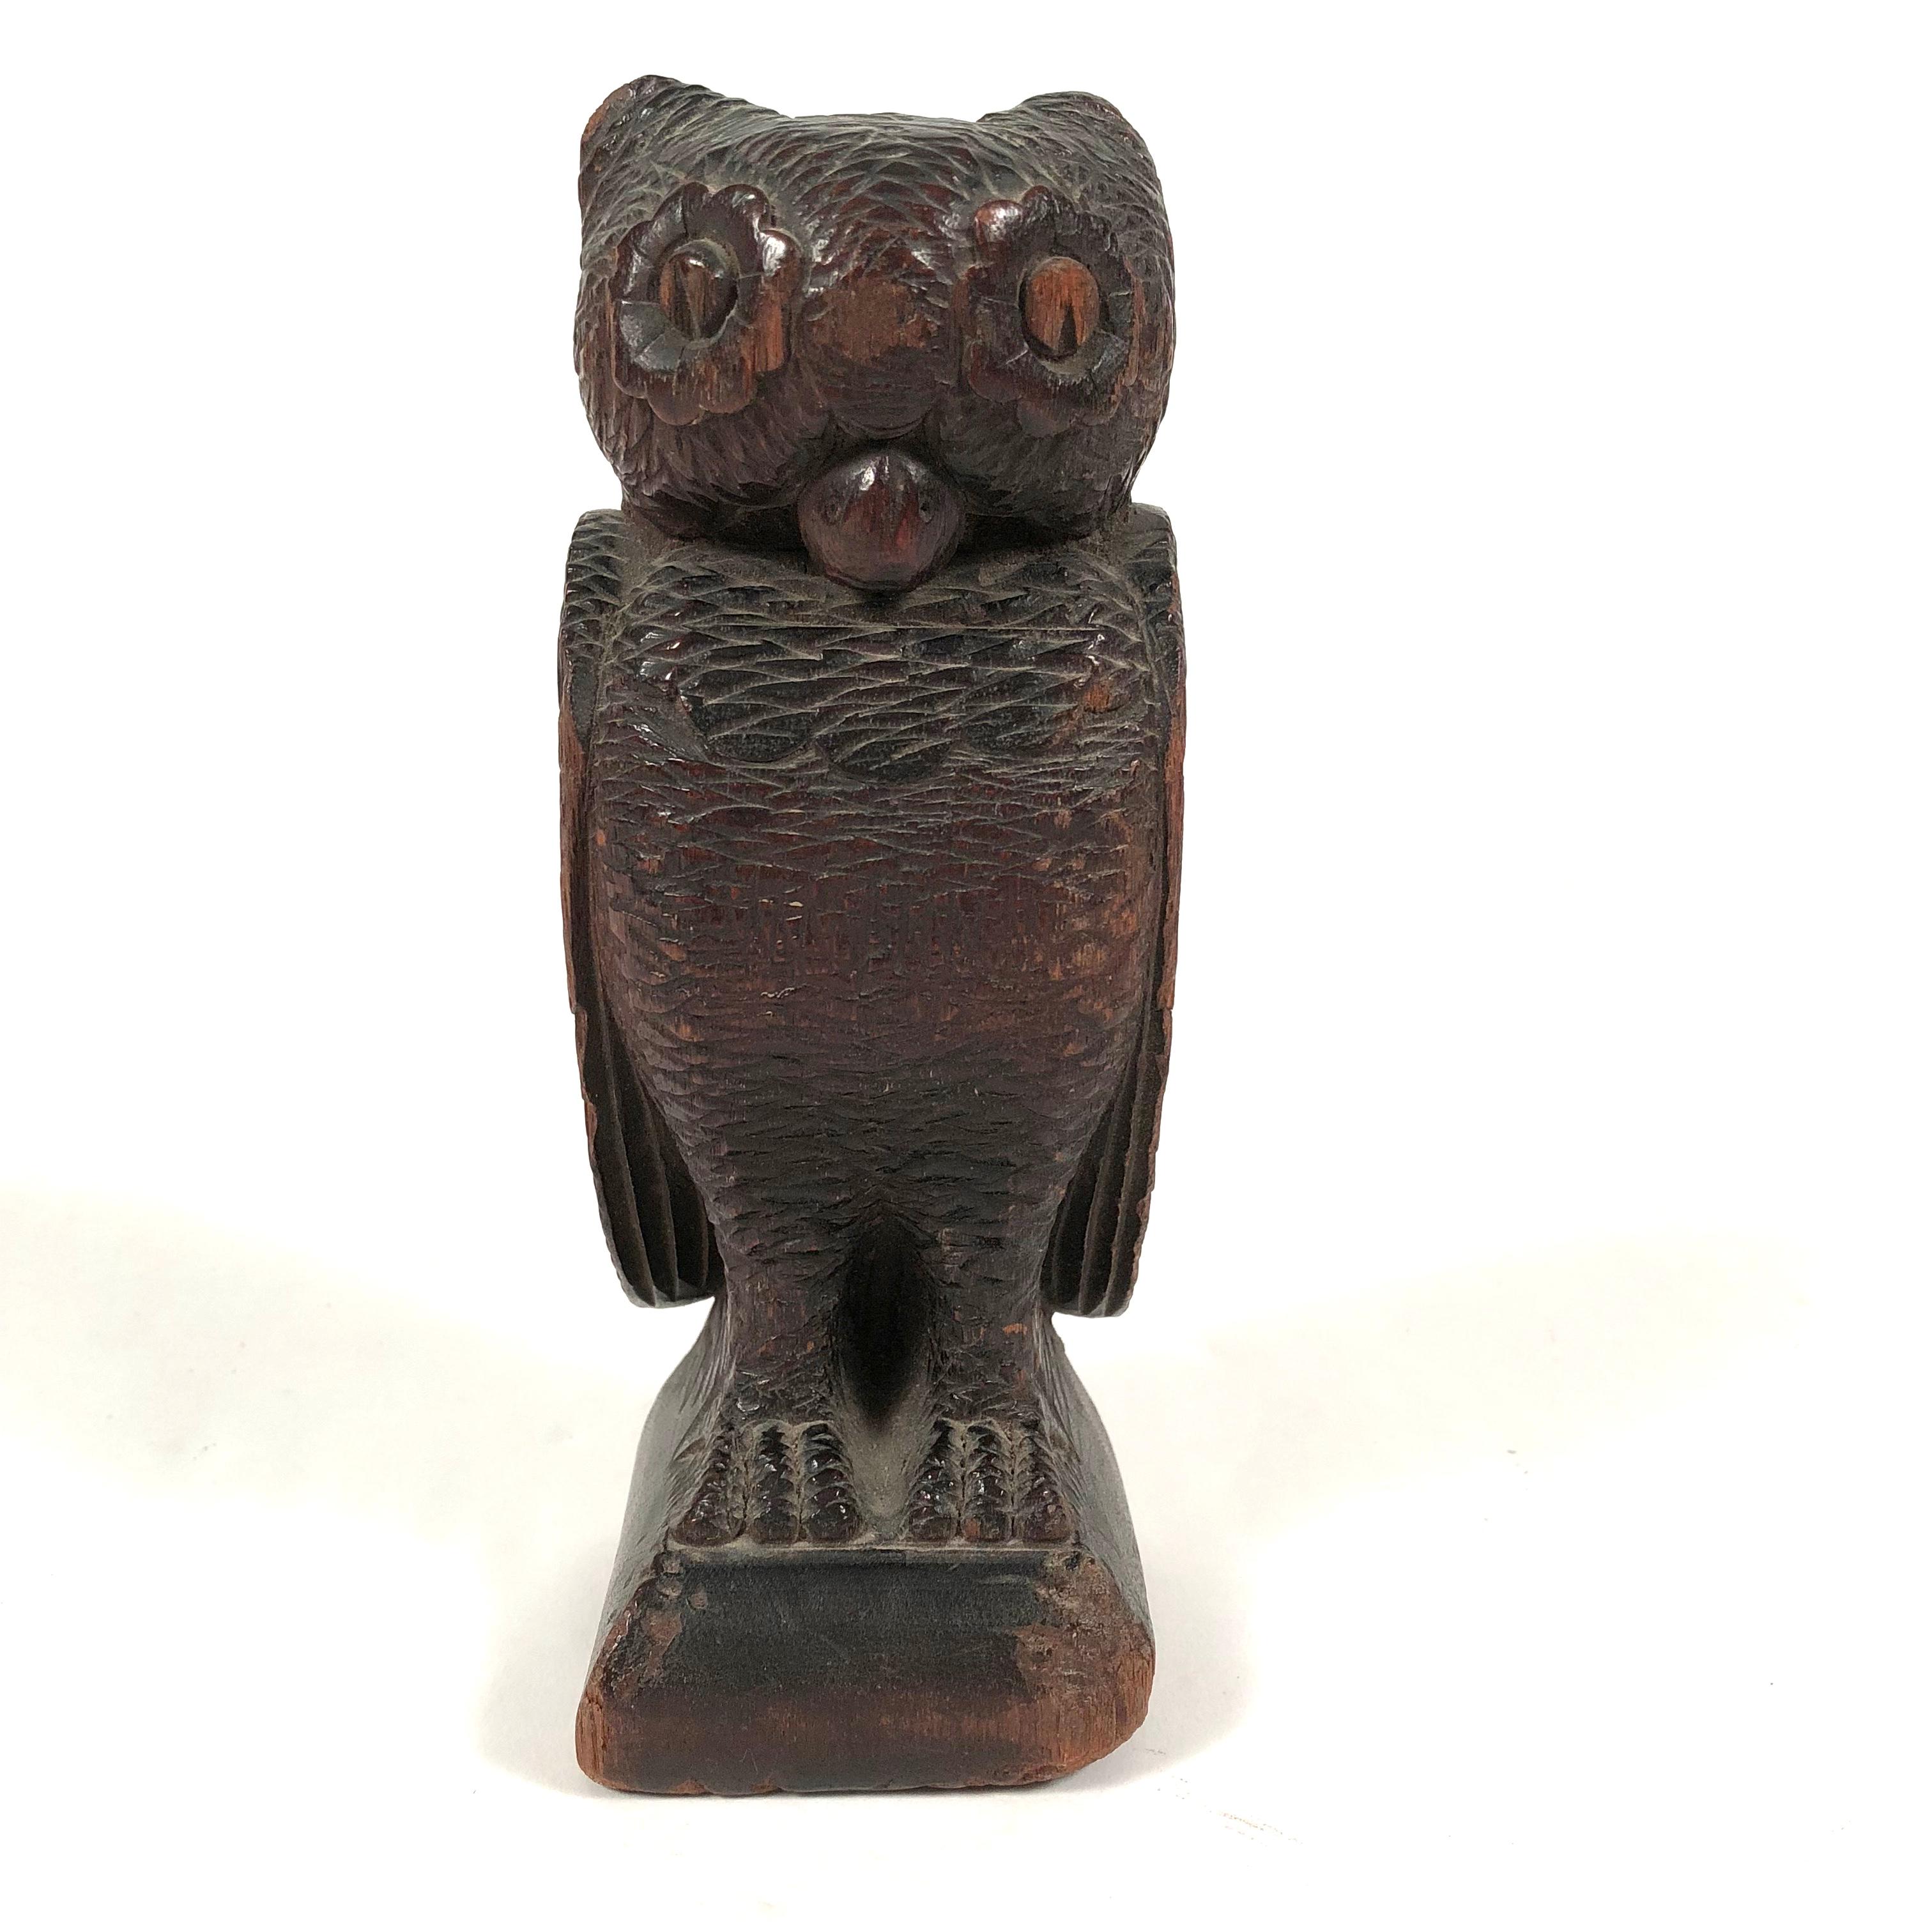 A 19th century Folk Art carved wood sculpture of an owl, facing forward with its wings by its side, animated wide open eyes and head and body with detailed feather and talon carving on 3 sides.